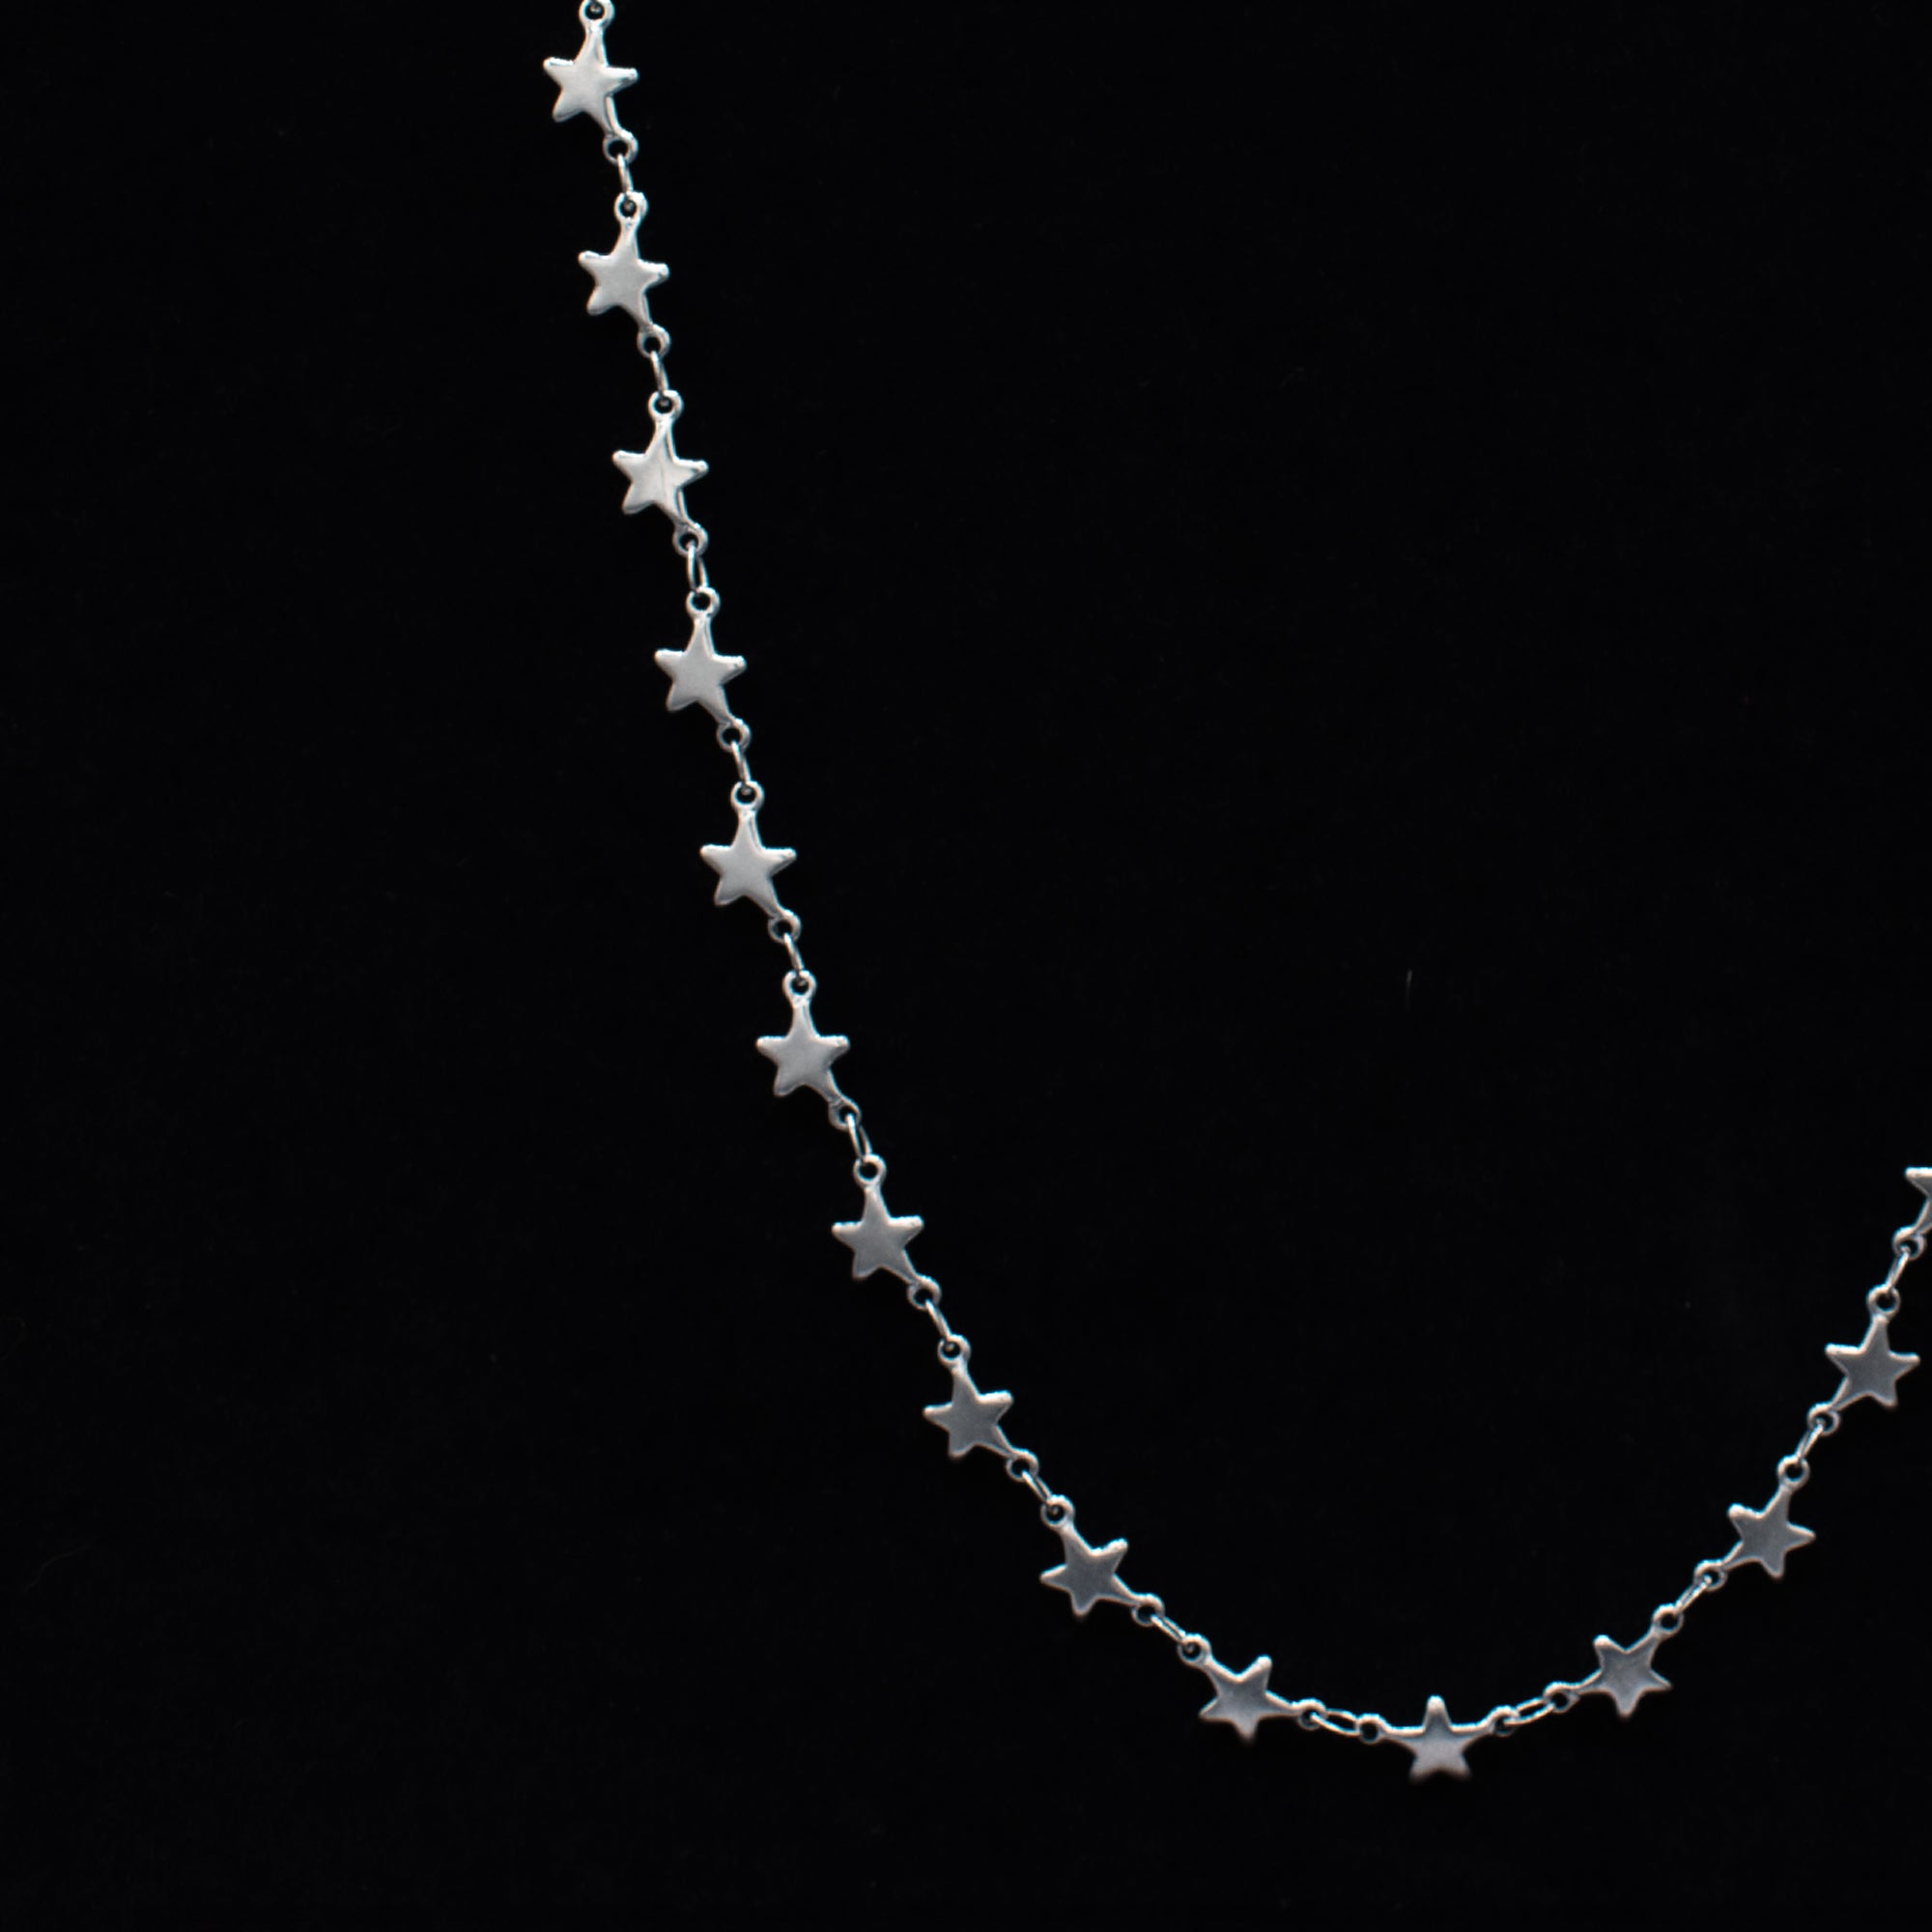 Star Link Necklace - (Silver) 10mm